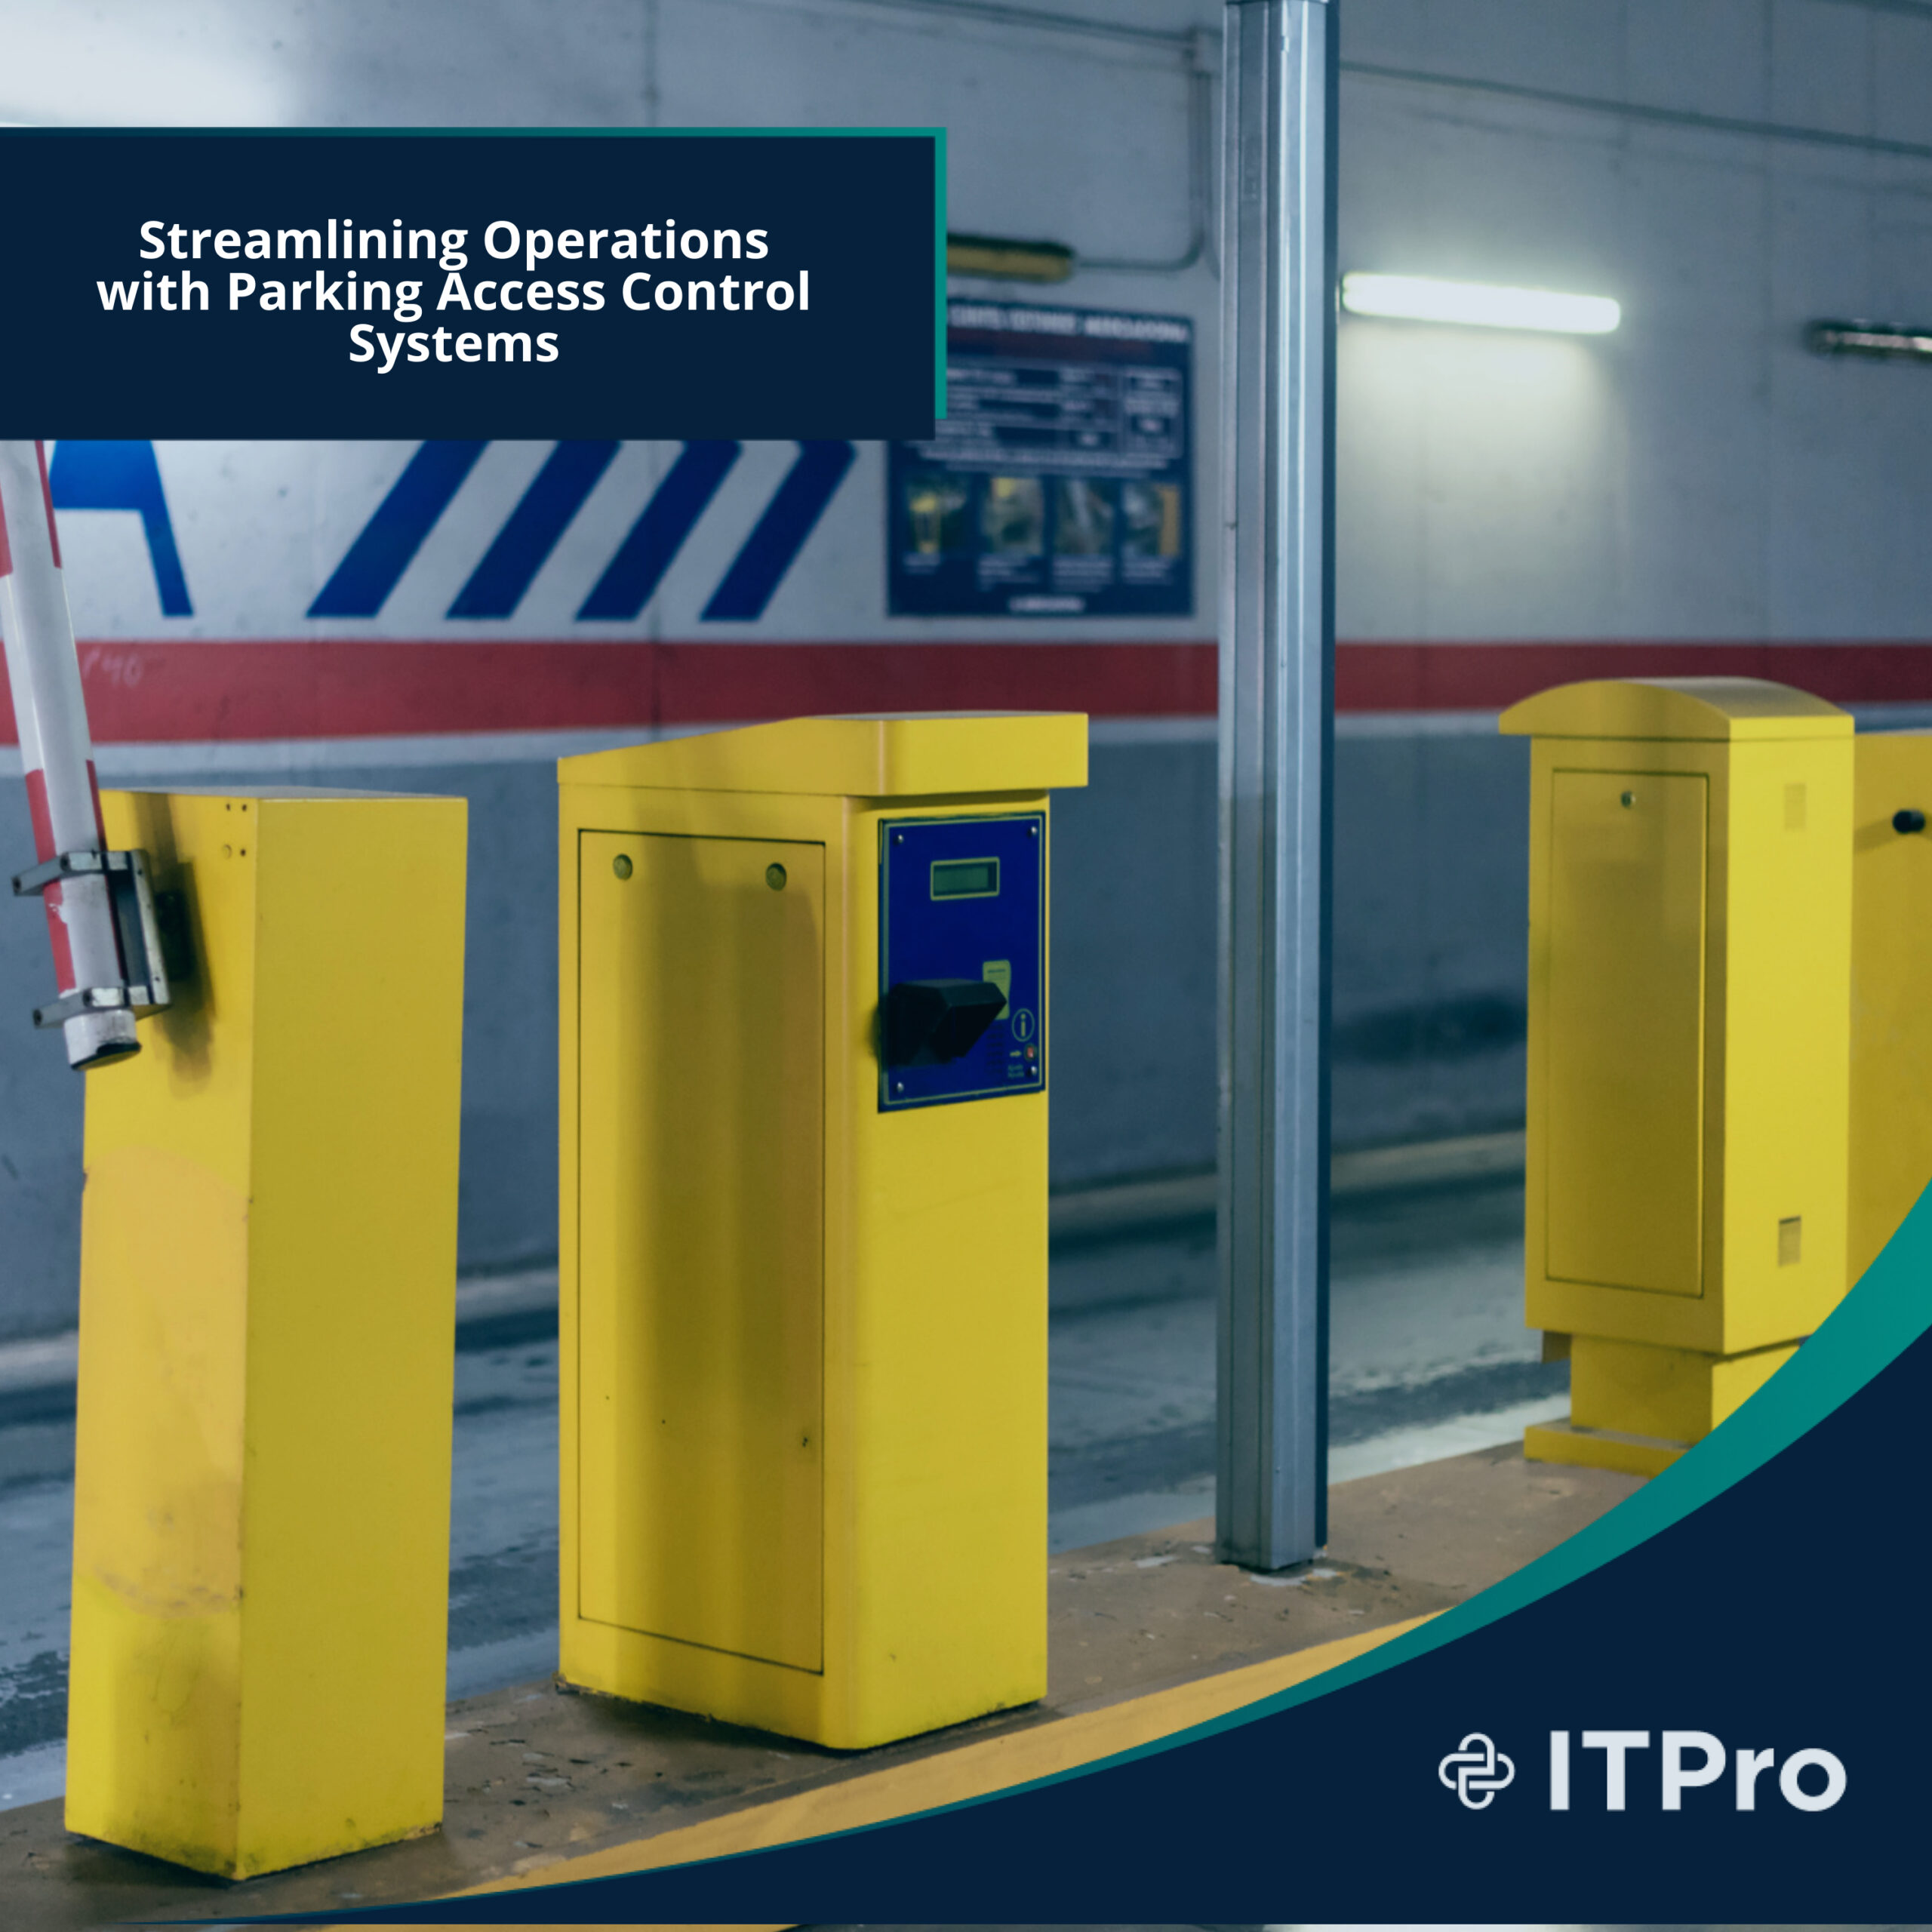 Streamlining Operations with Parking Access Control Systems